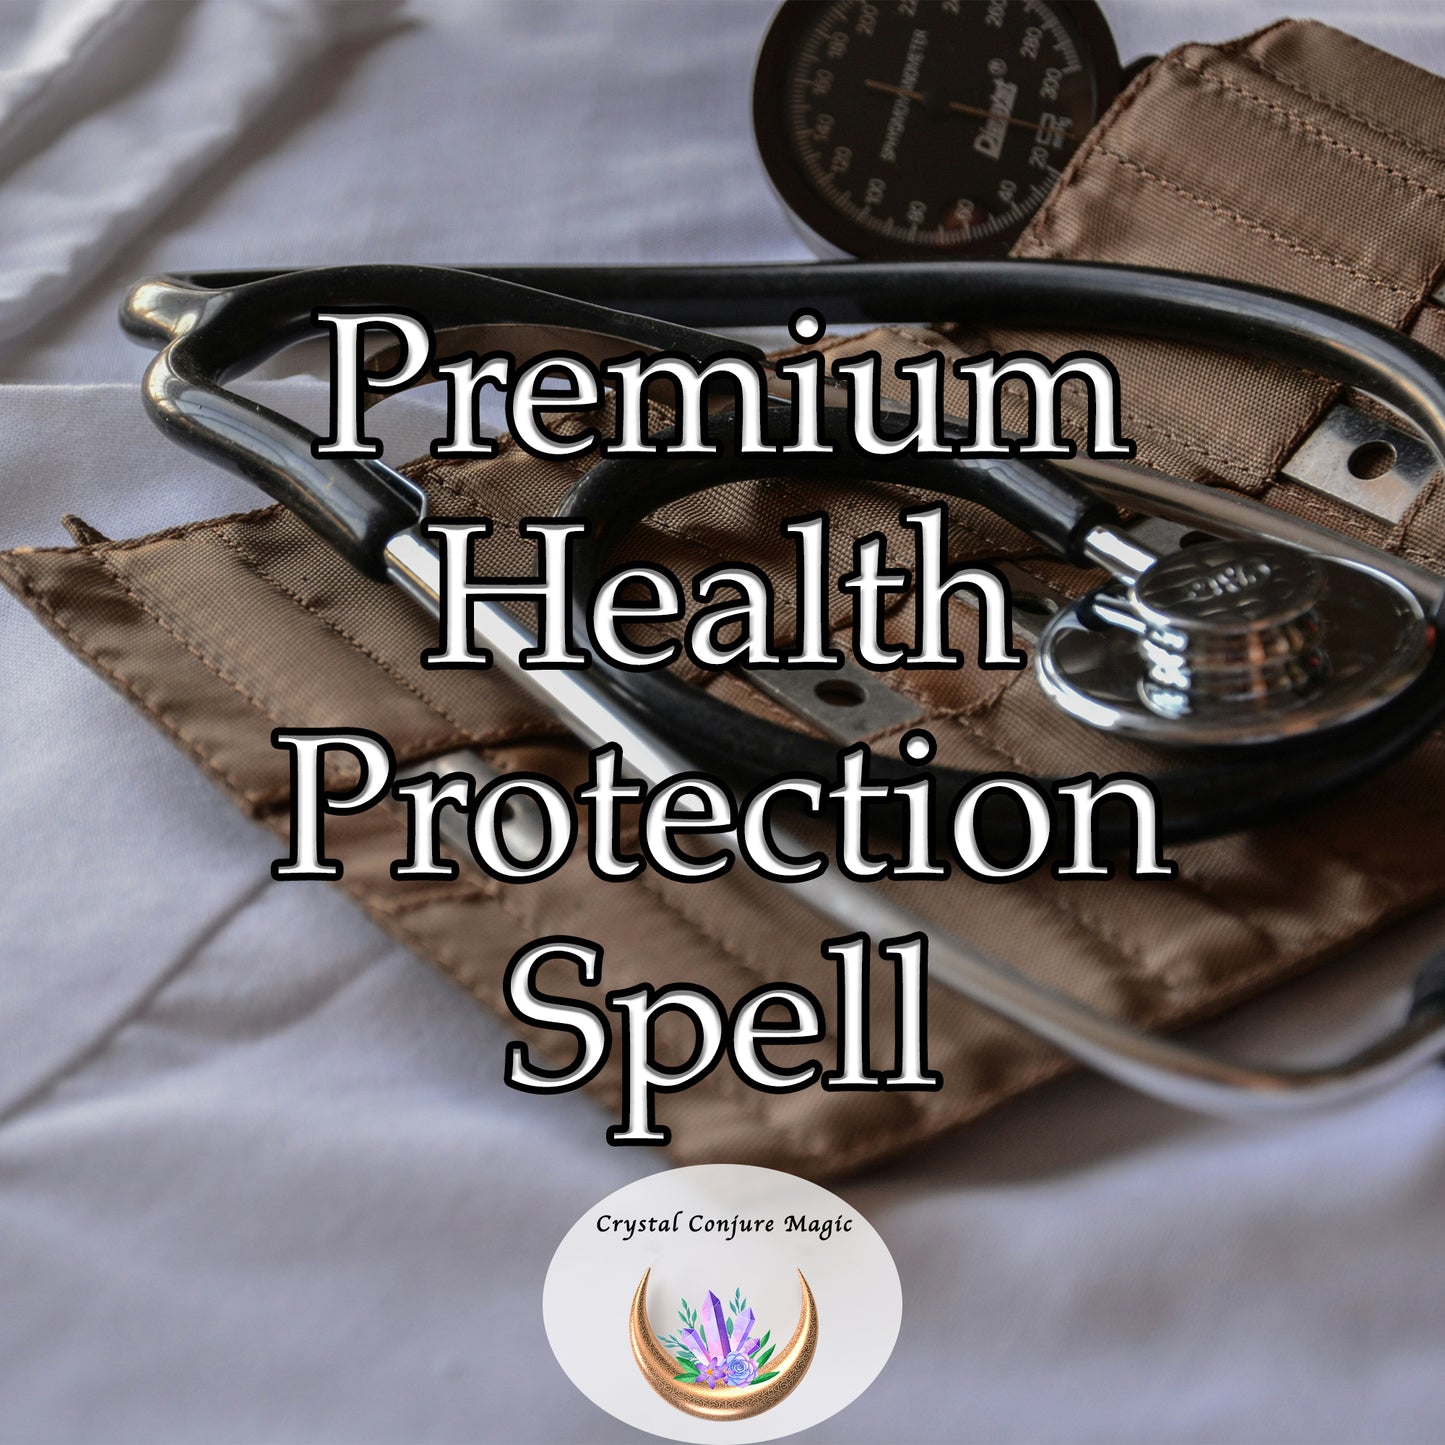 Premium Health Protection Spell - a protective barrier, guarding your physical and mental well-being